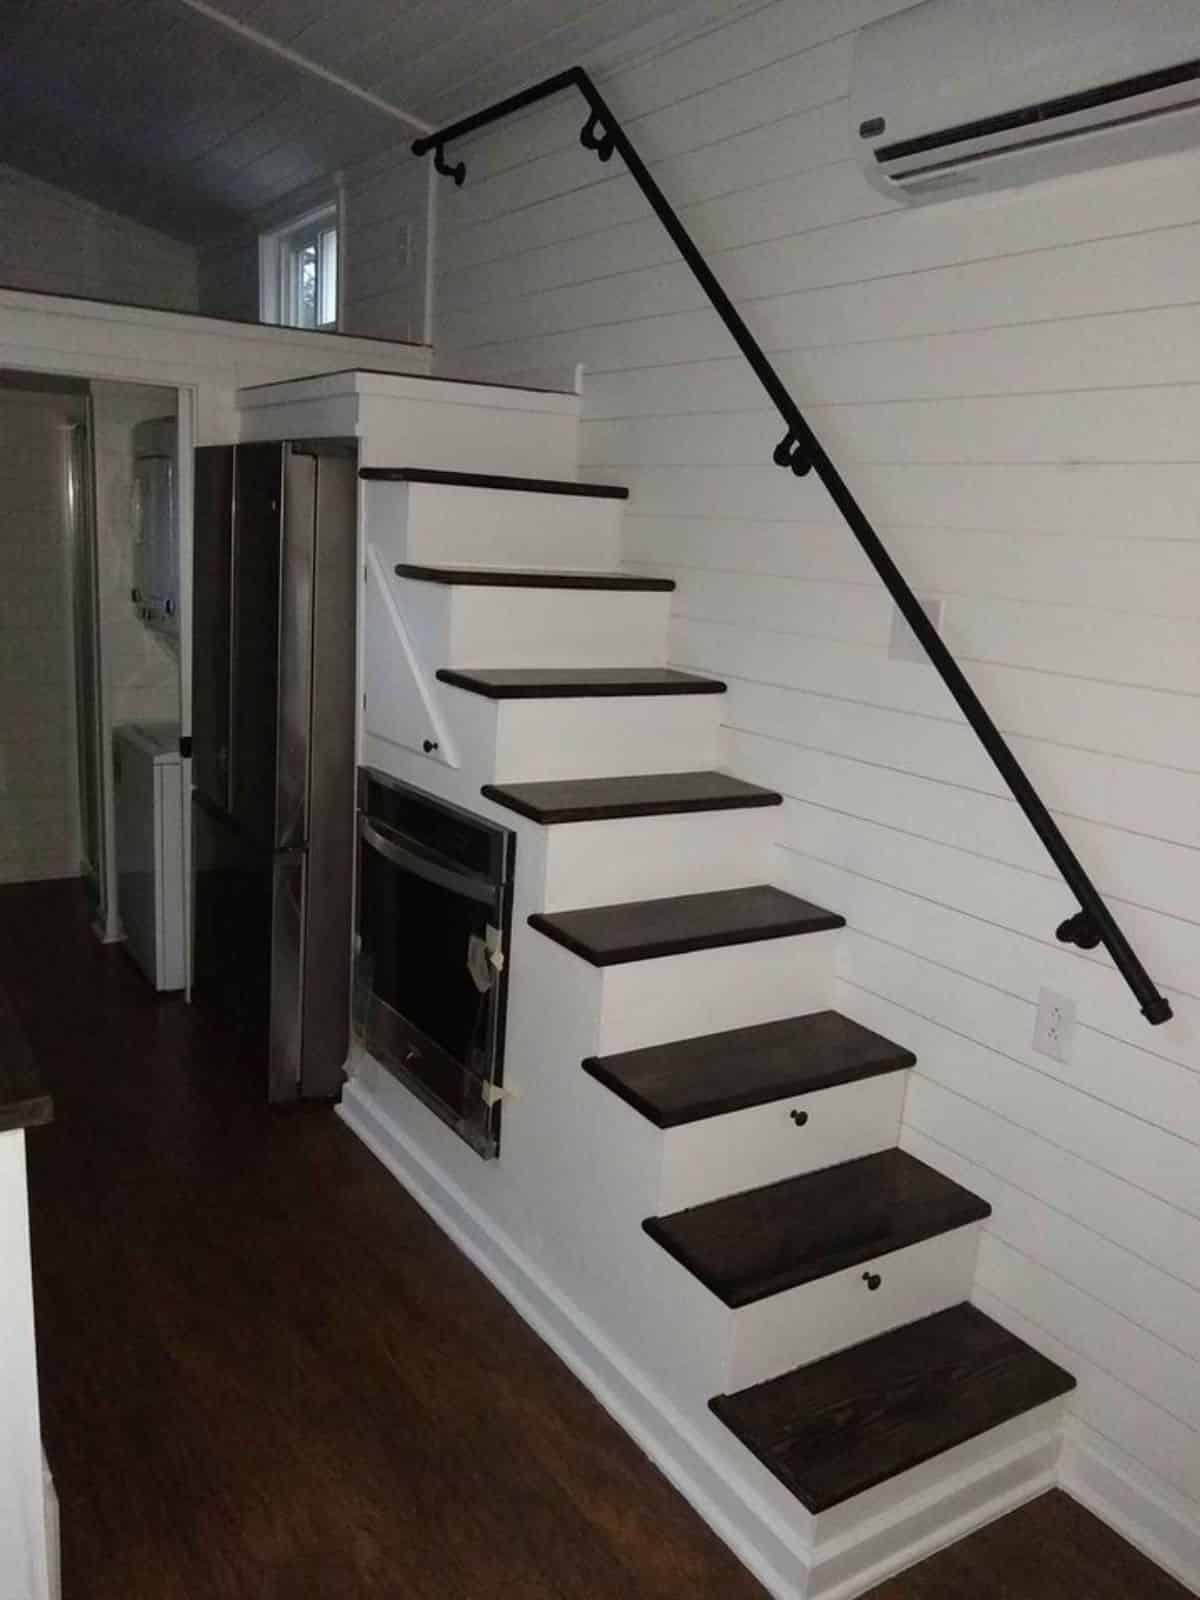 Multi purpose stairs leading to the loft bedroom of 24’ custom tiny house